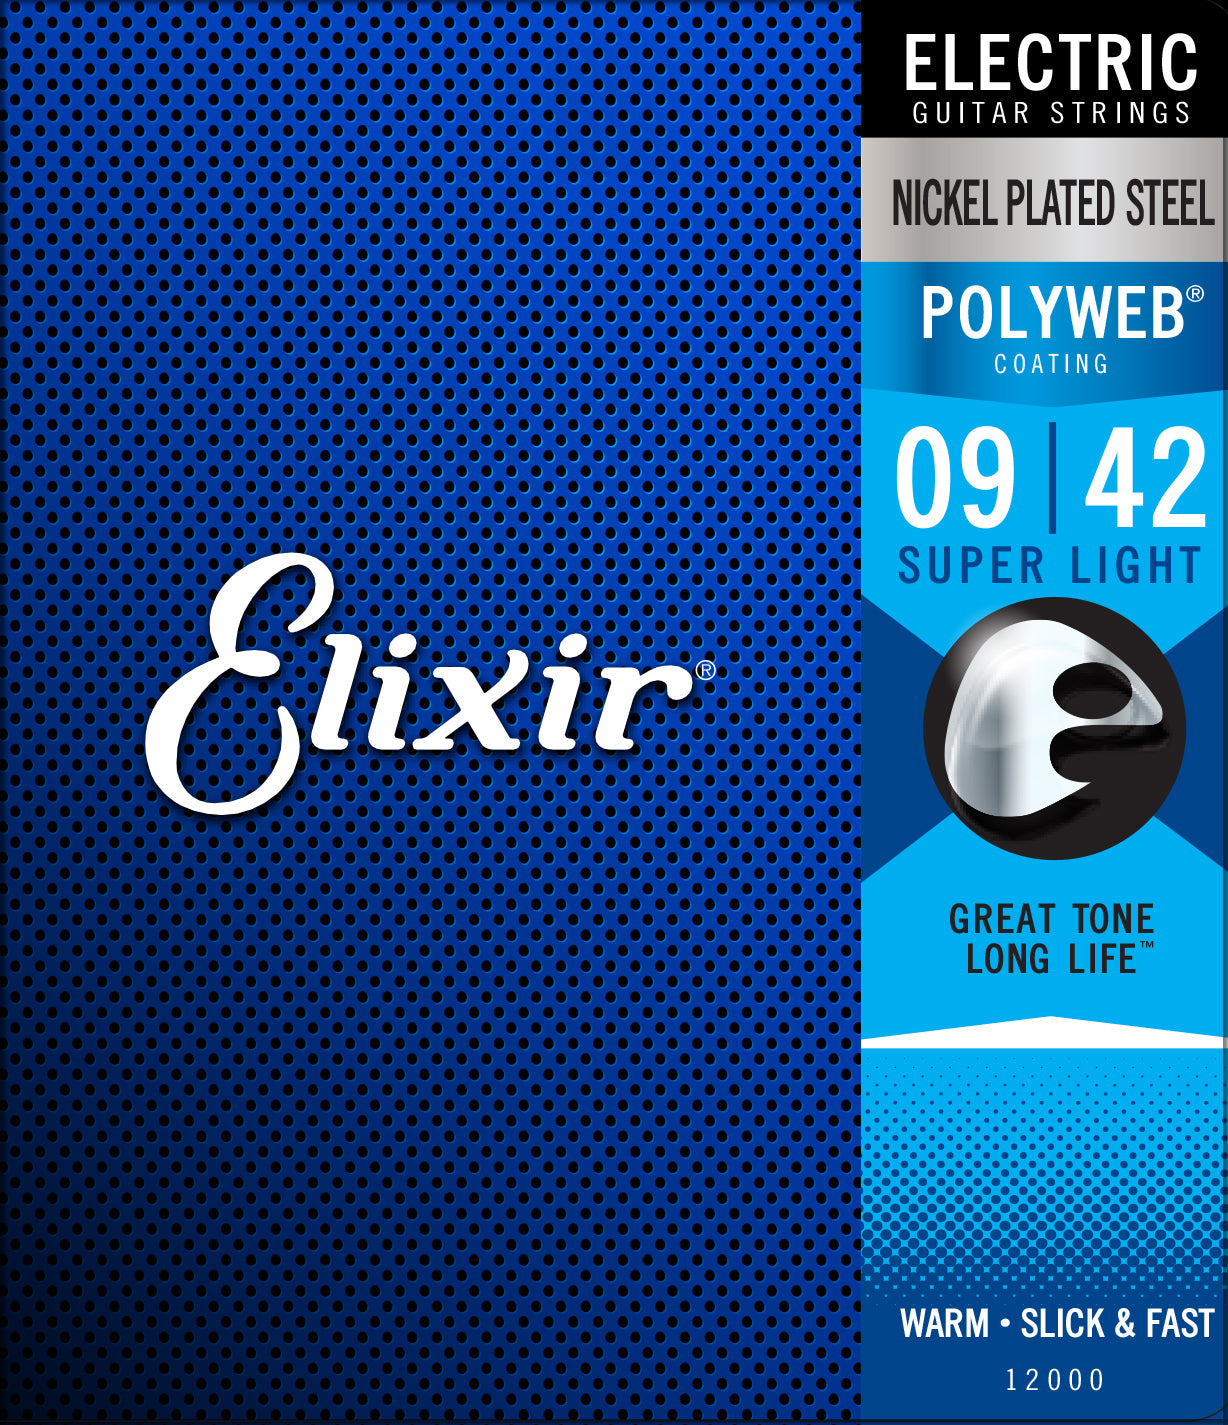 Elixir 12000 Super Light 09-42 Polyweb Nickel Plated Electric Guitar Strings